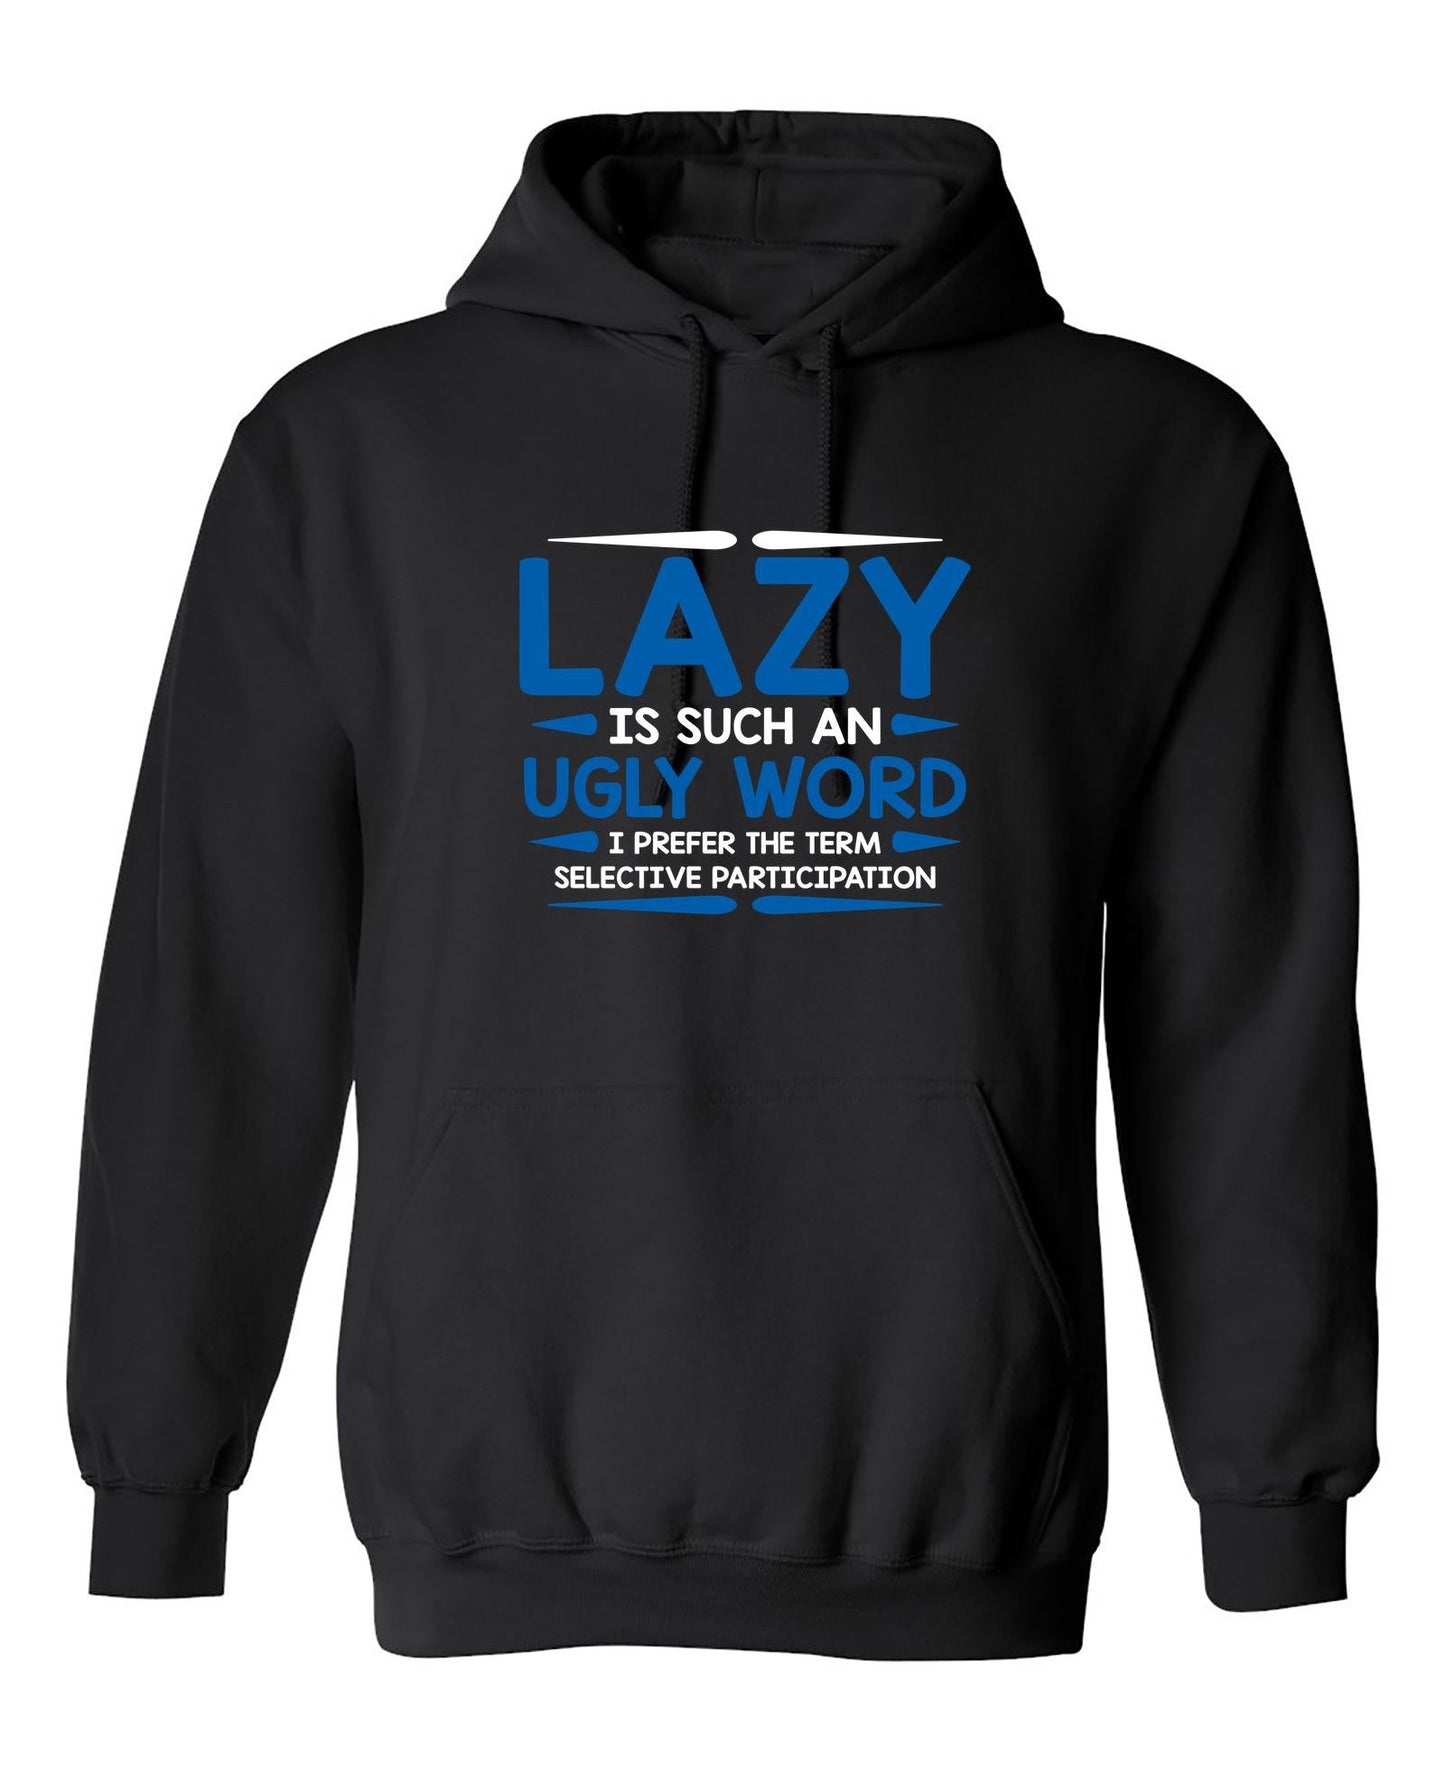 Funny T-Shirts design "Lazy Is Such An Ugly Word I Prefer Selective Participation"